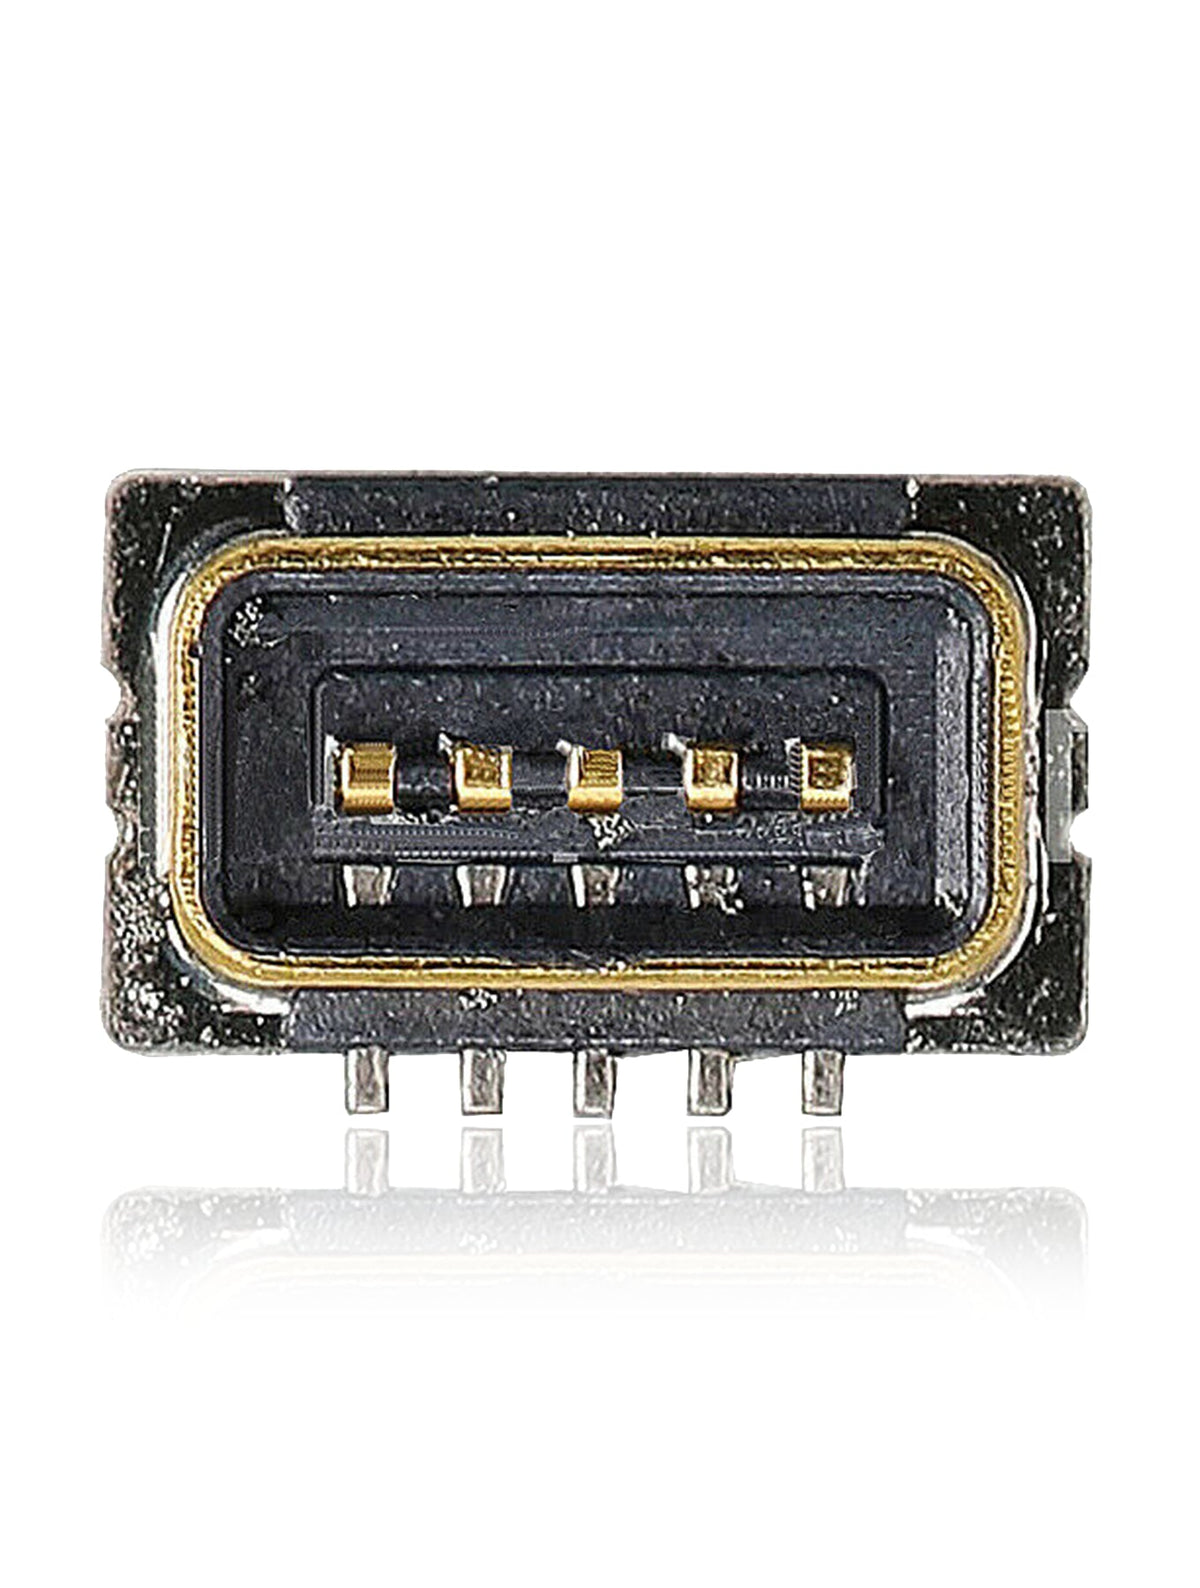 ANTENNA FPC CONNECTOR COMPATIBLE WITH IPHONE 8 / 8 PLUS (JLAT_EF: 5 PIN)